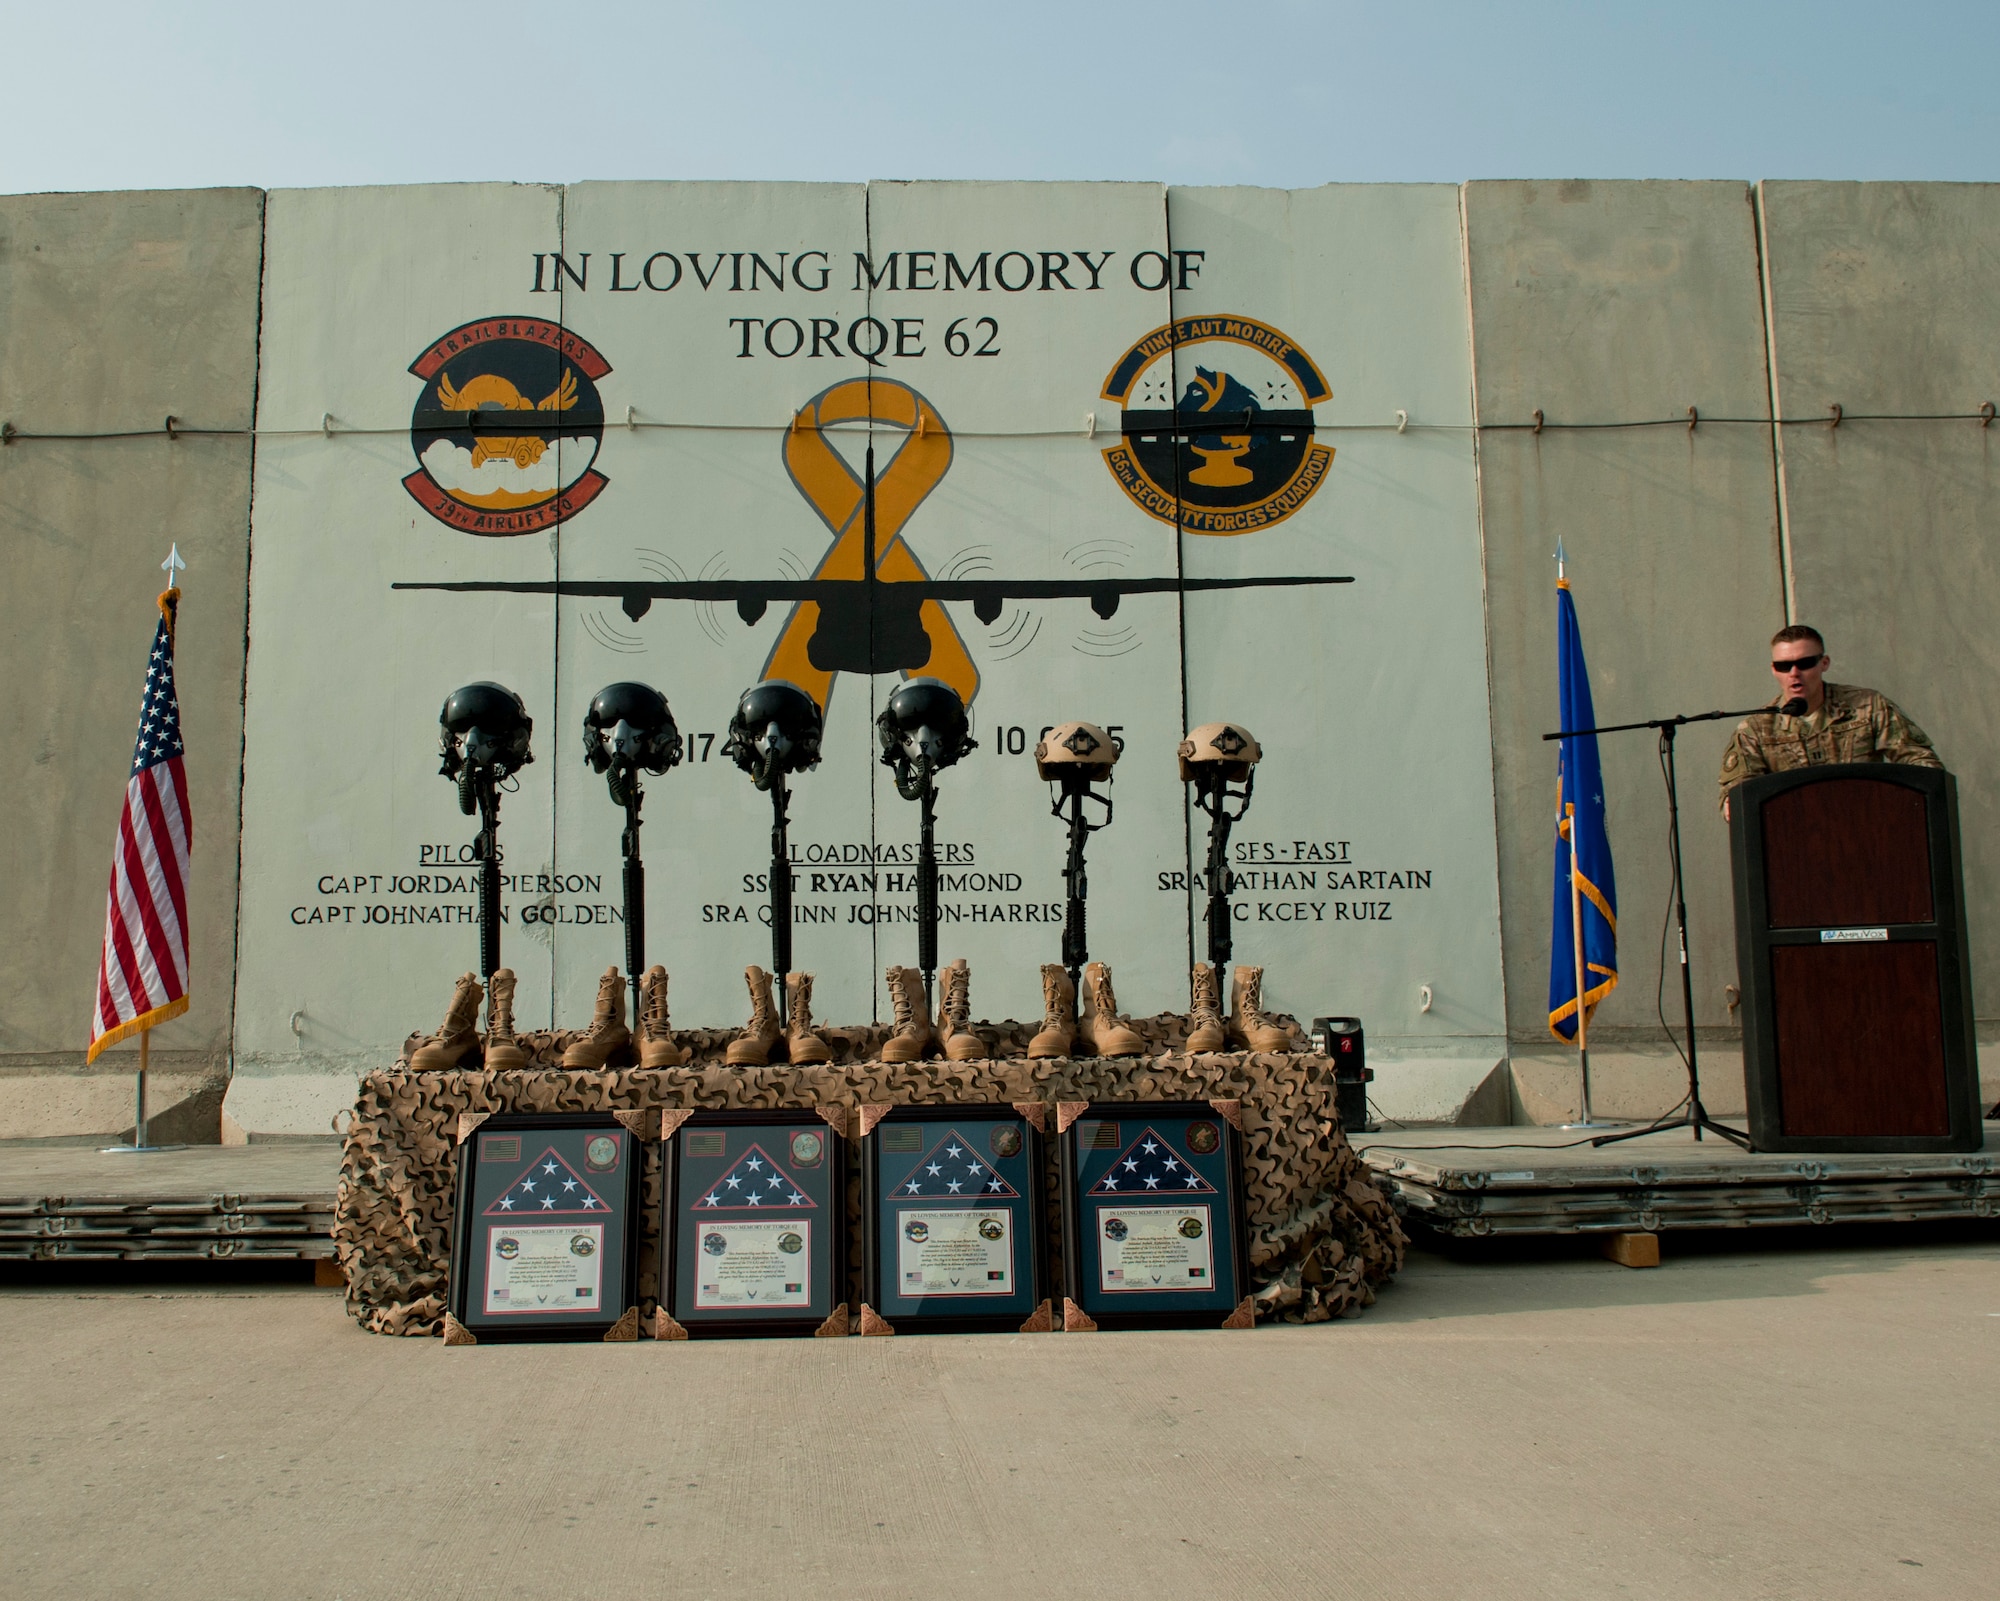 U.S. Air Force Capt. Shawn Chamberlin, 455th Expeditionary Security Forces Squadron, commander, makes remarks during the TORQE 62 remembrance ceremony, Bagram Airfield, Afghanistan, Oct. 2, 2016. Airmen from the 455th AEW gathered to remember the six Airmen and five contractors lost when TORQE 62 crashed Oct. 2, 2015. (U.S. Air Force photo by Capt. Korey Fratini)